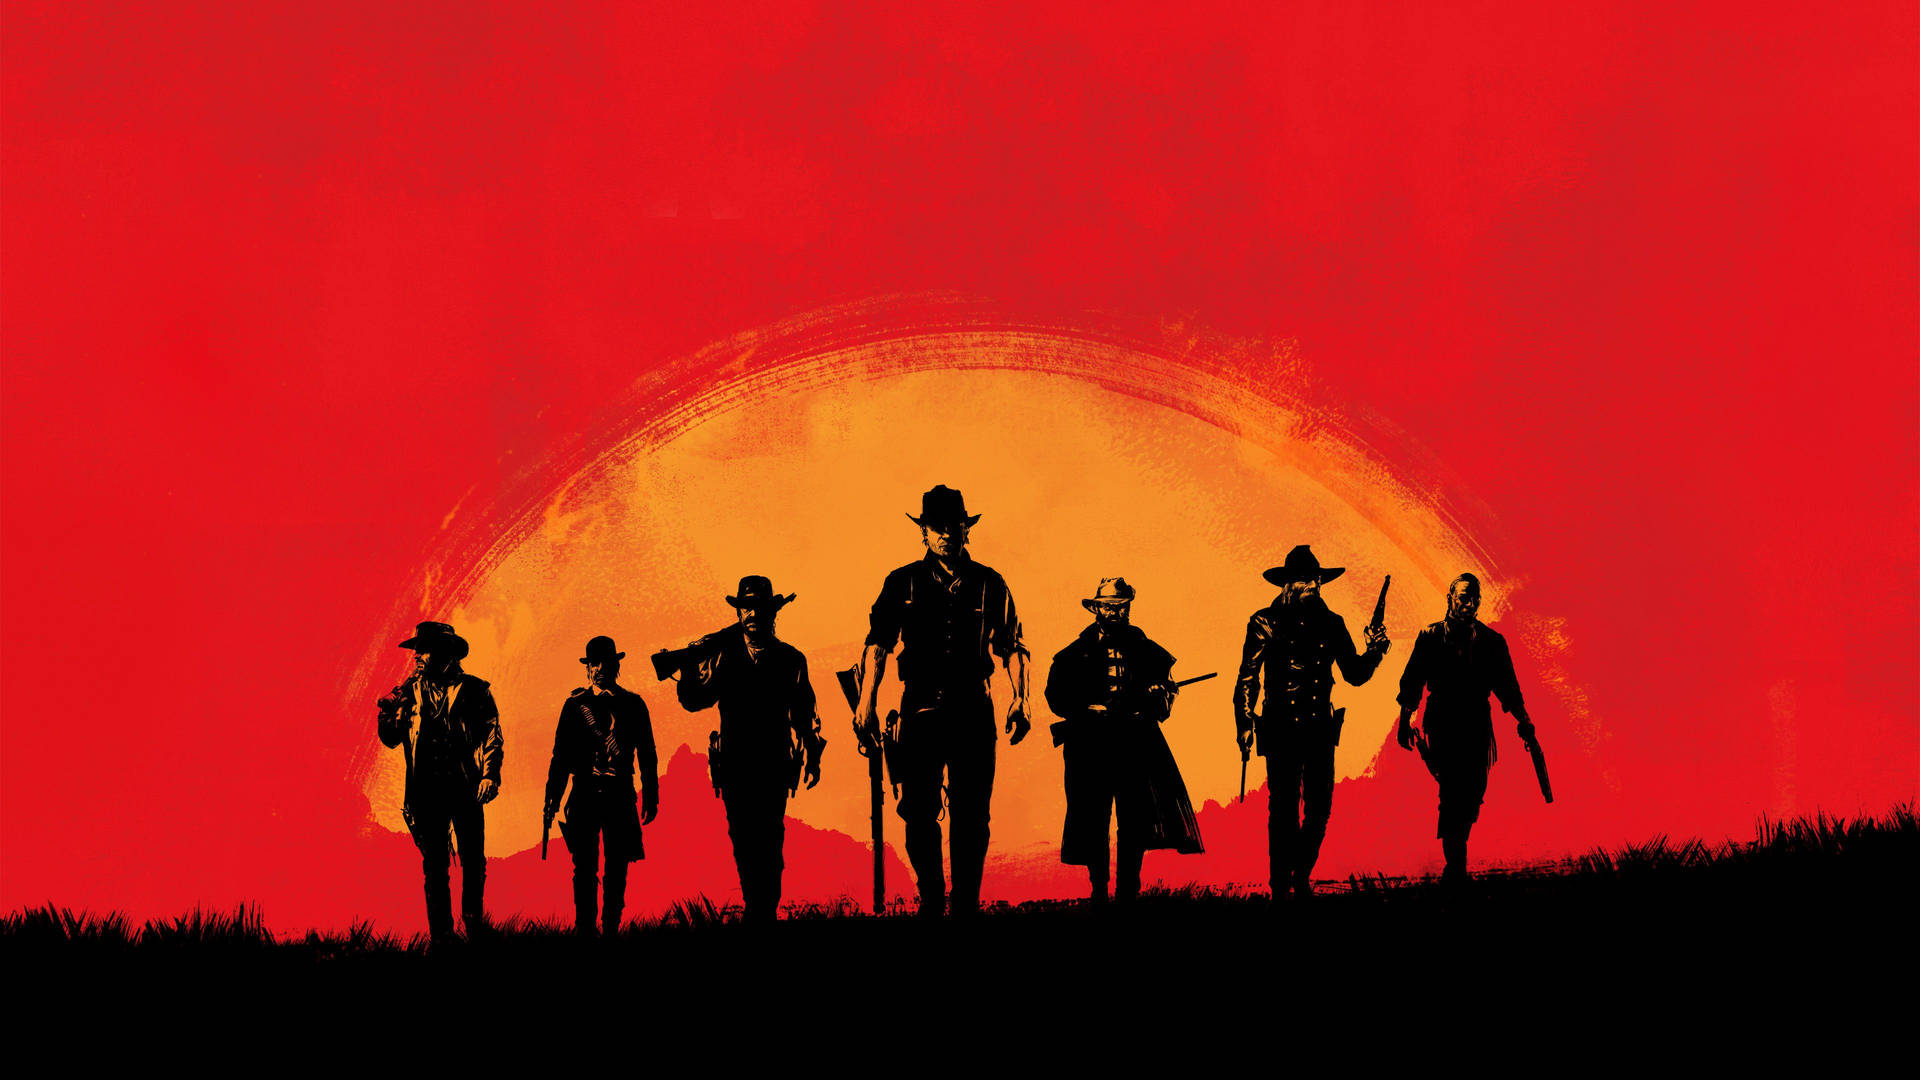 Best Ps4 Red Dead Redemption 2 Background